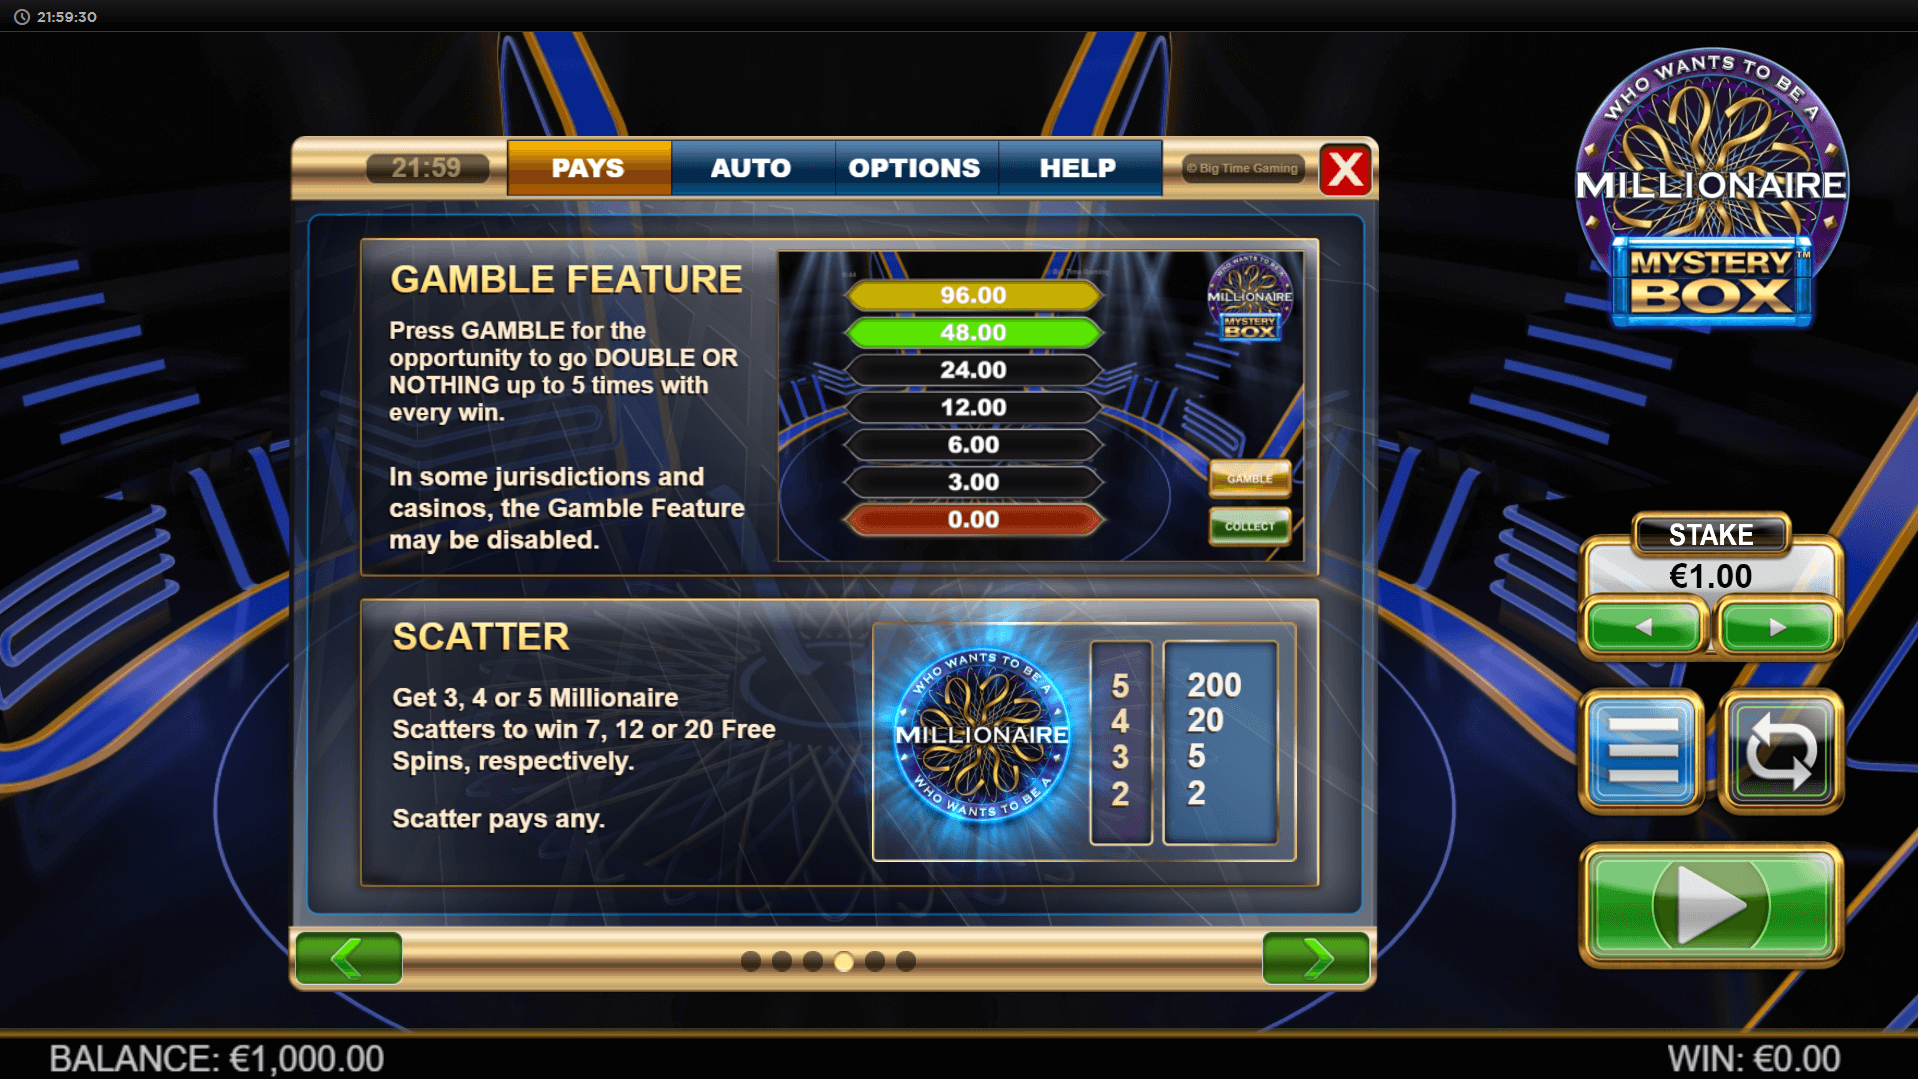 who wants to be a millionaire: mystery box slot machine detail image 3